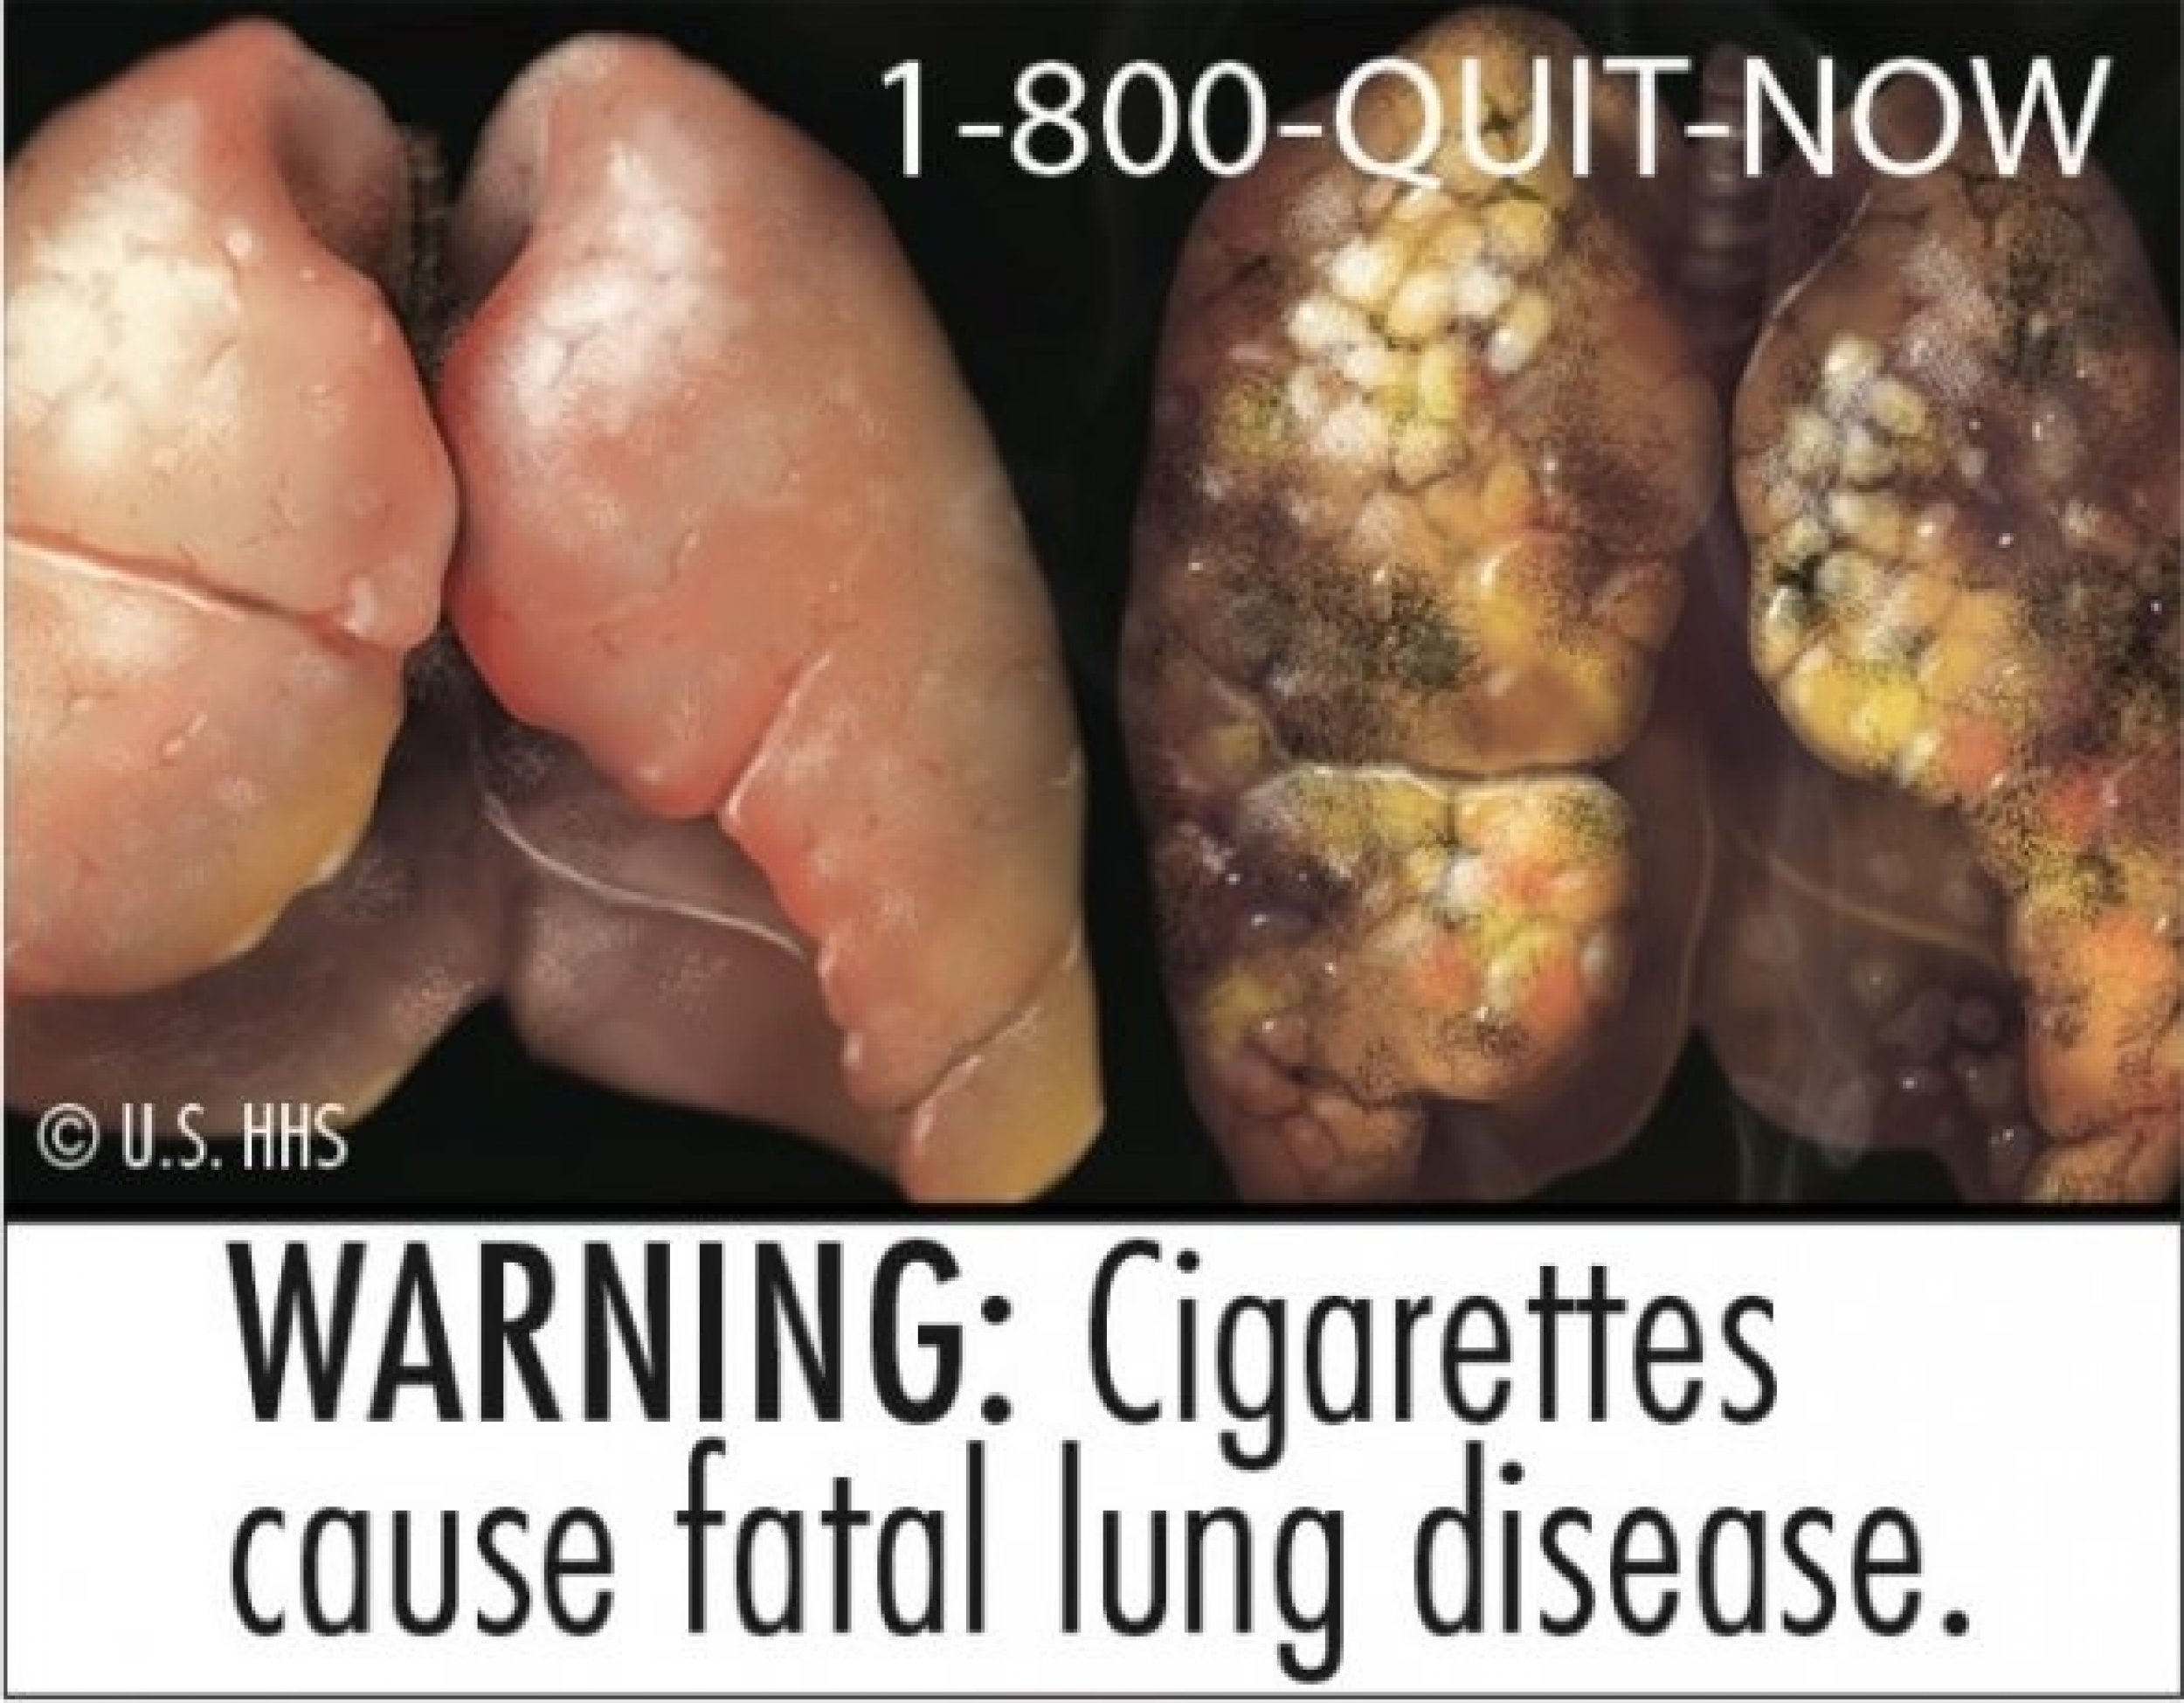 FDA releases new labels you are about to see on cigarette packs